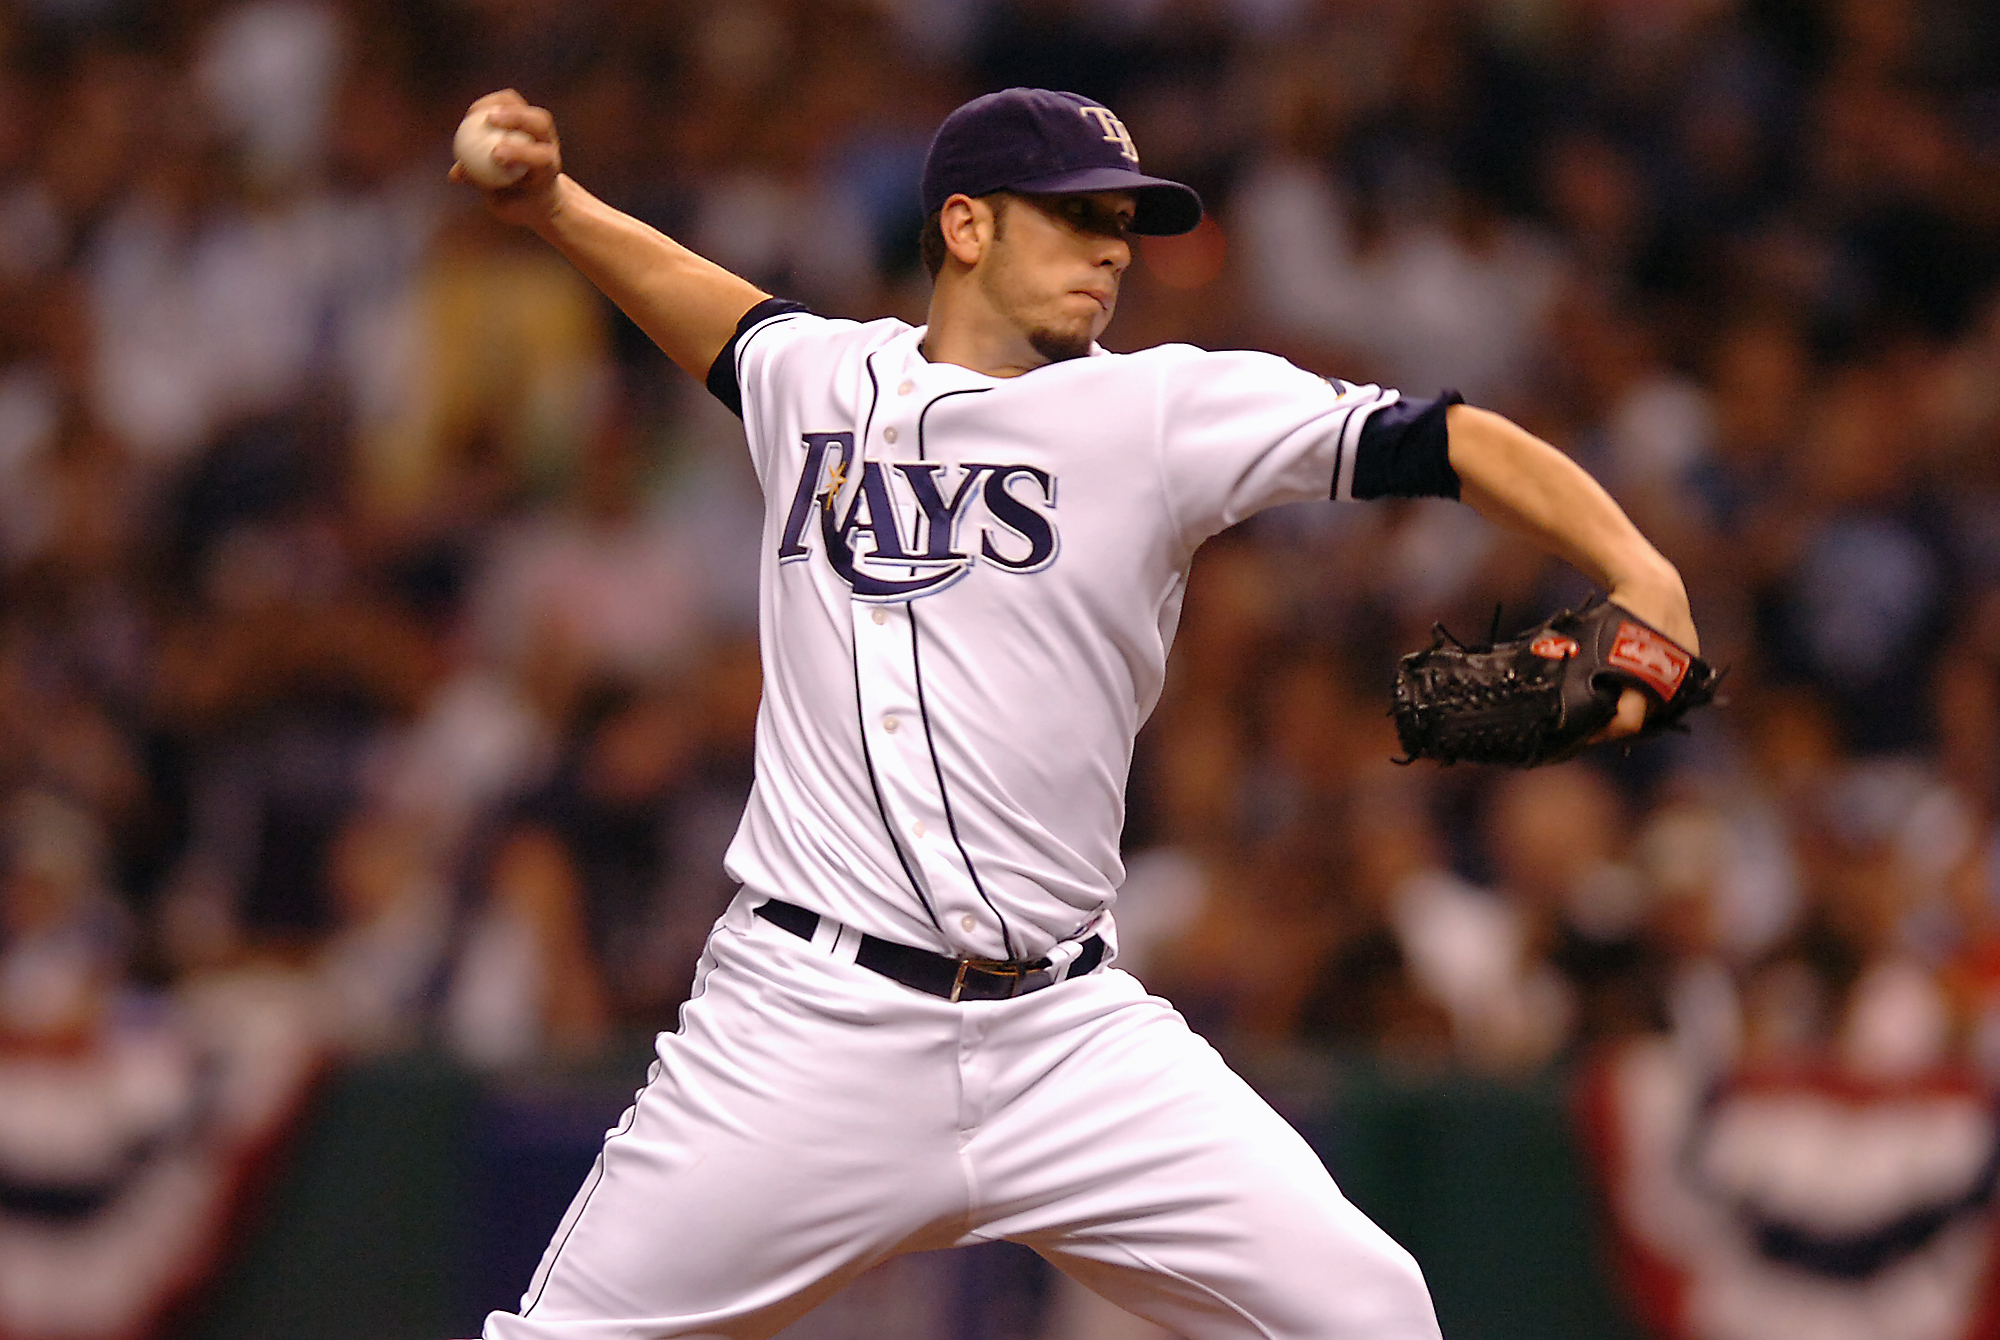 Rays' Success in Fixing Pitchers Is the Envy of the Rest of MLB